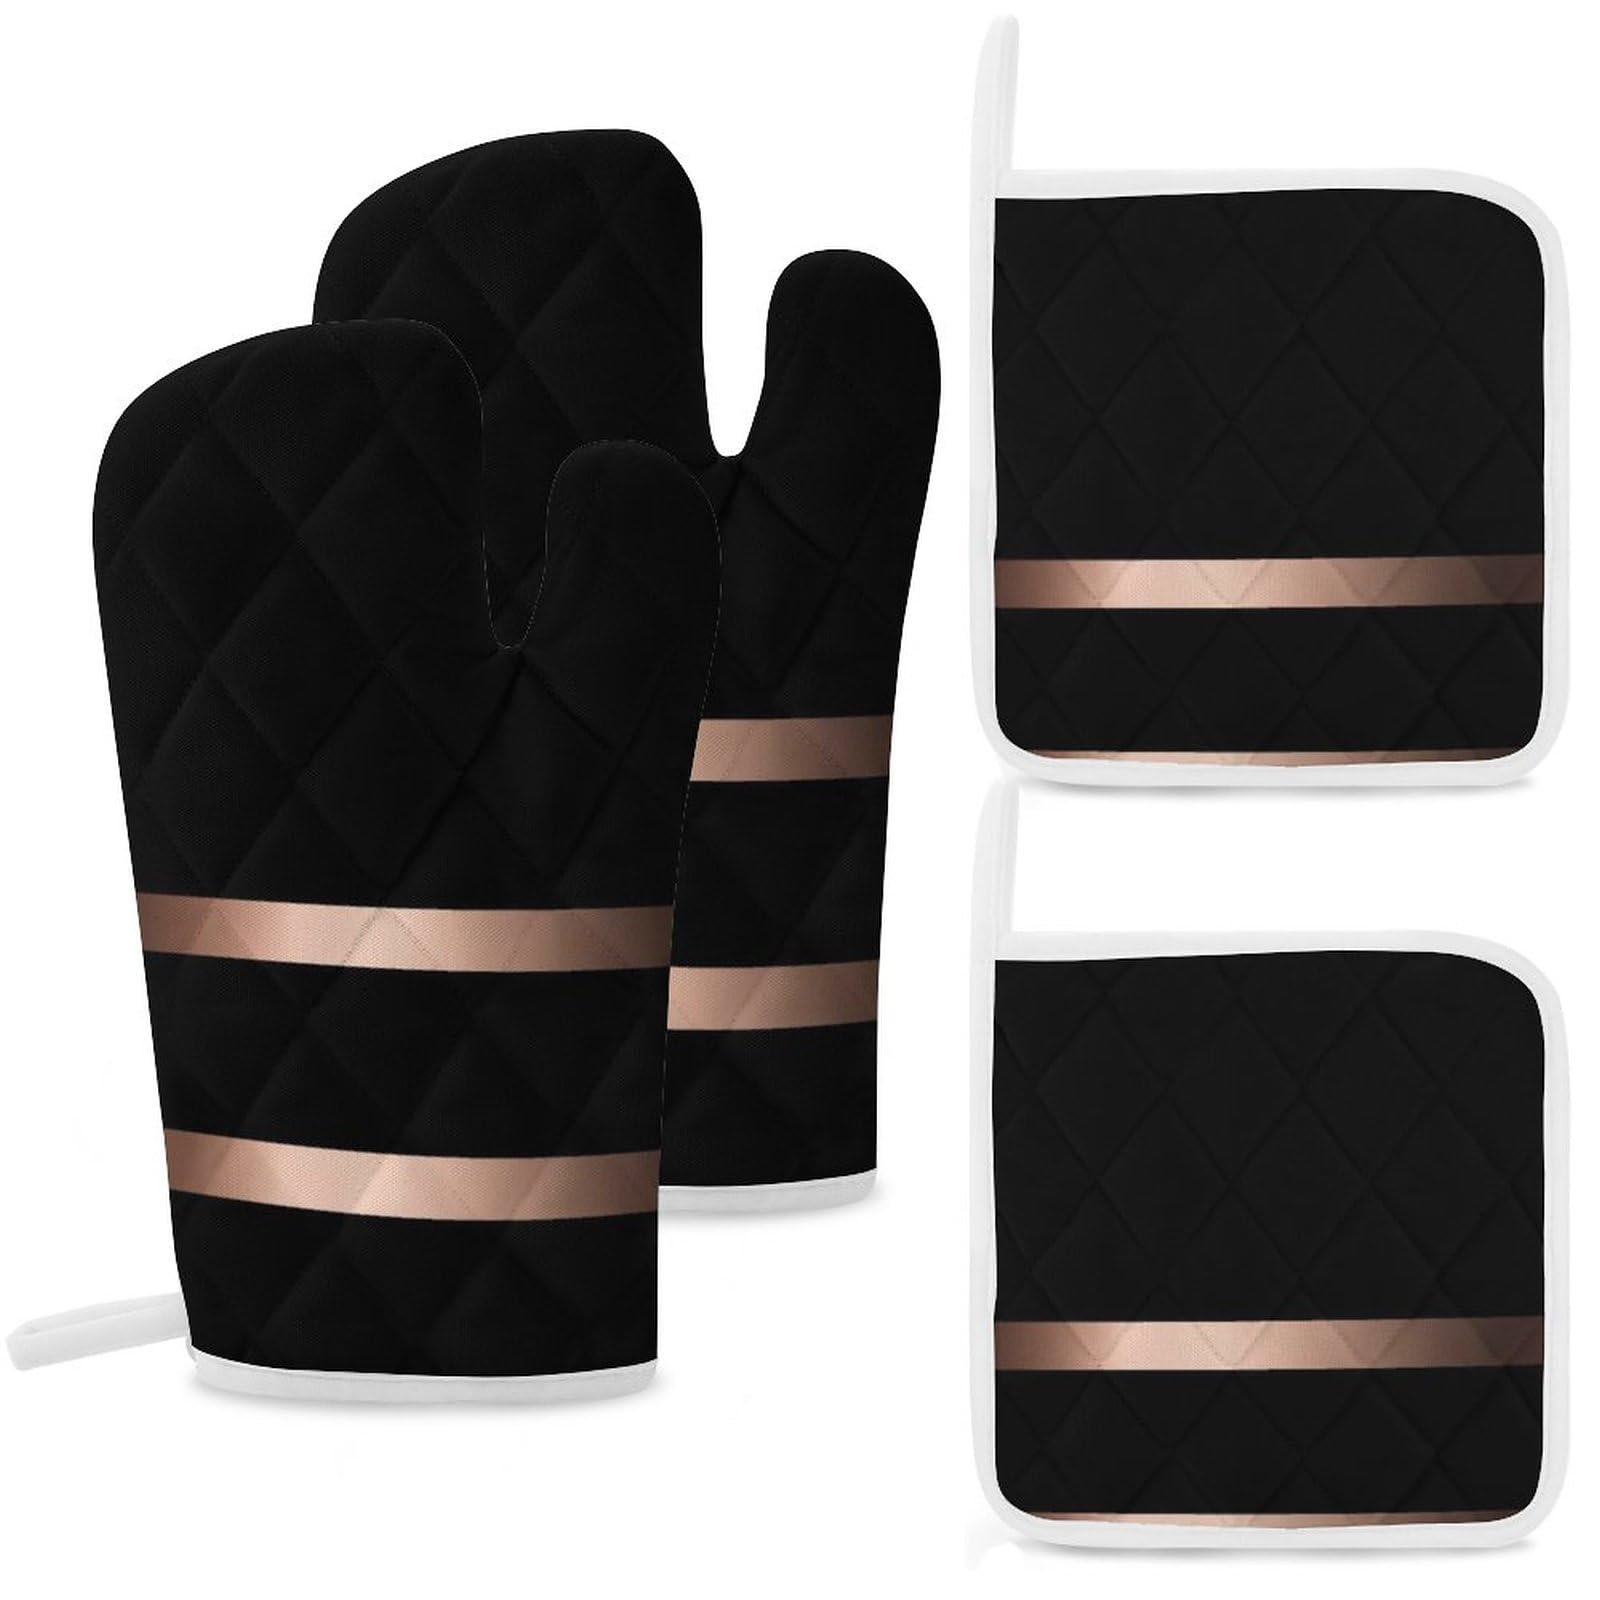 4Pcs Oven Mitts and Pot Holders Set, Black Stylish Rose Gold Heat Resistant Oven Mitts Gloves Set Hot Pads for Kitchen Cooking Grill